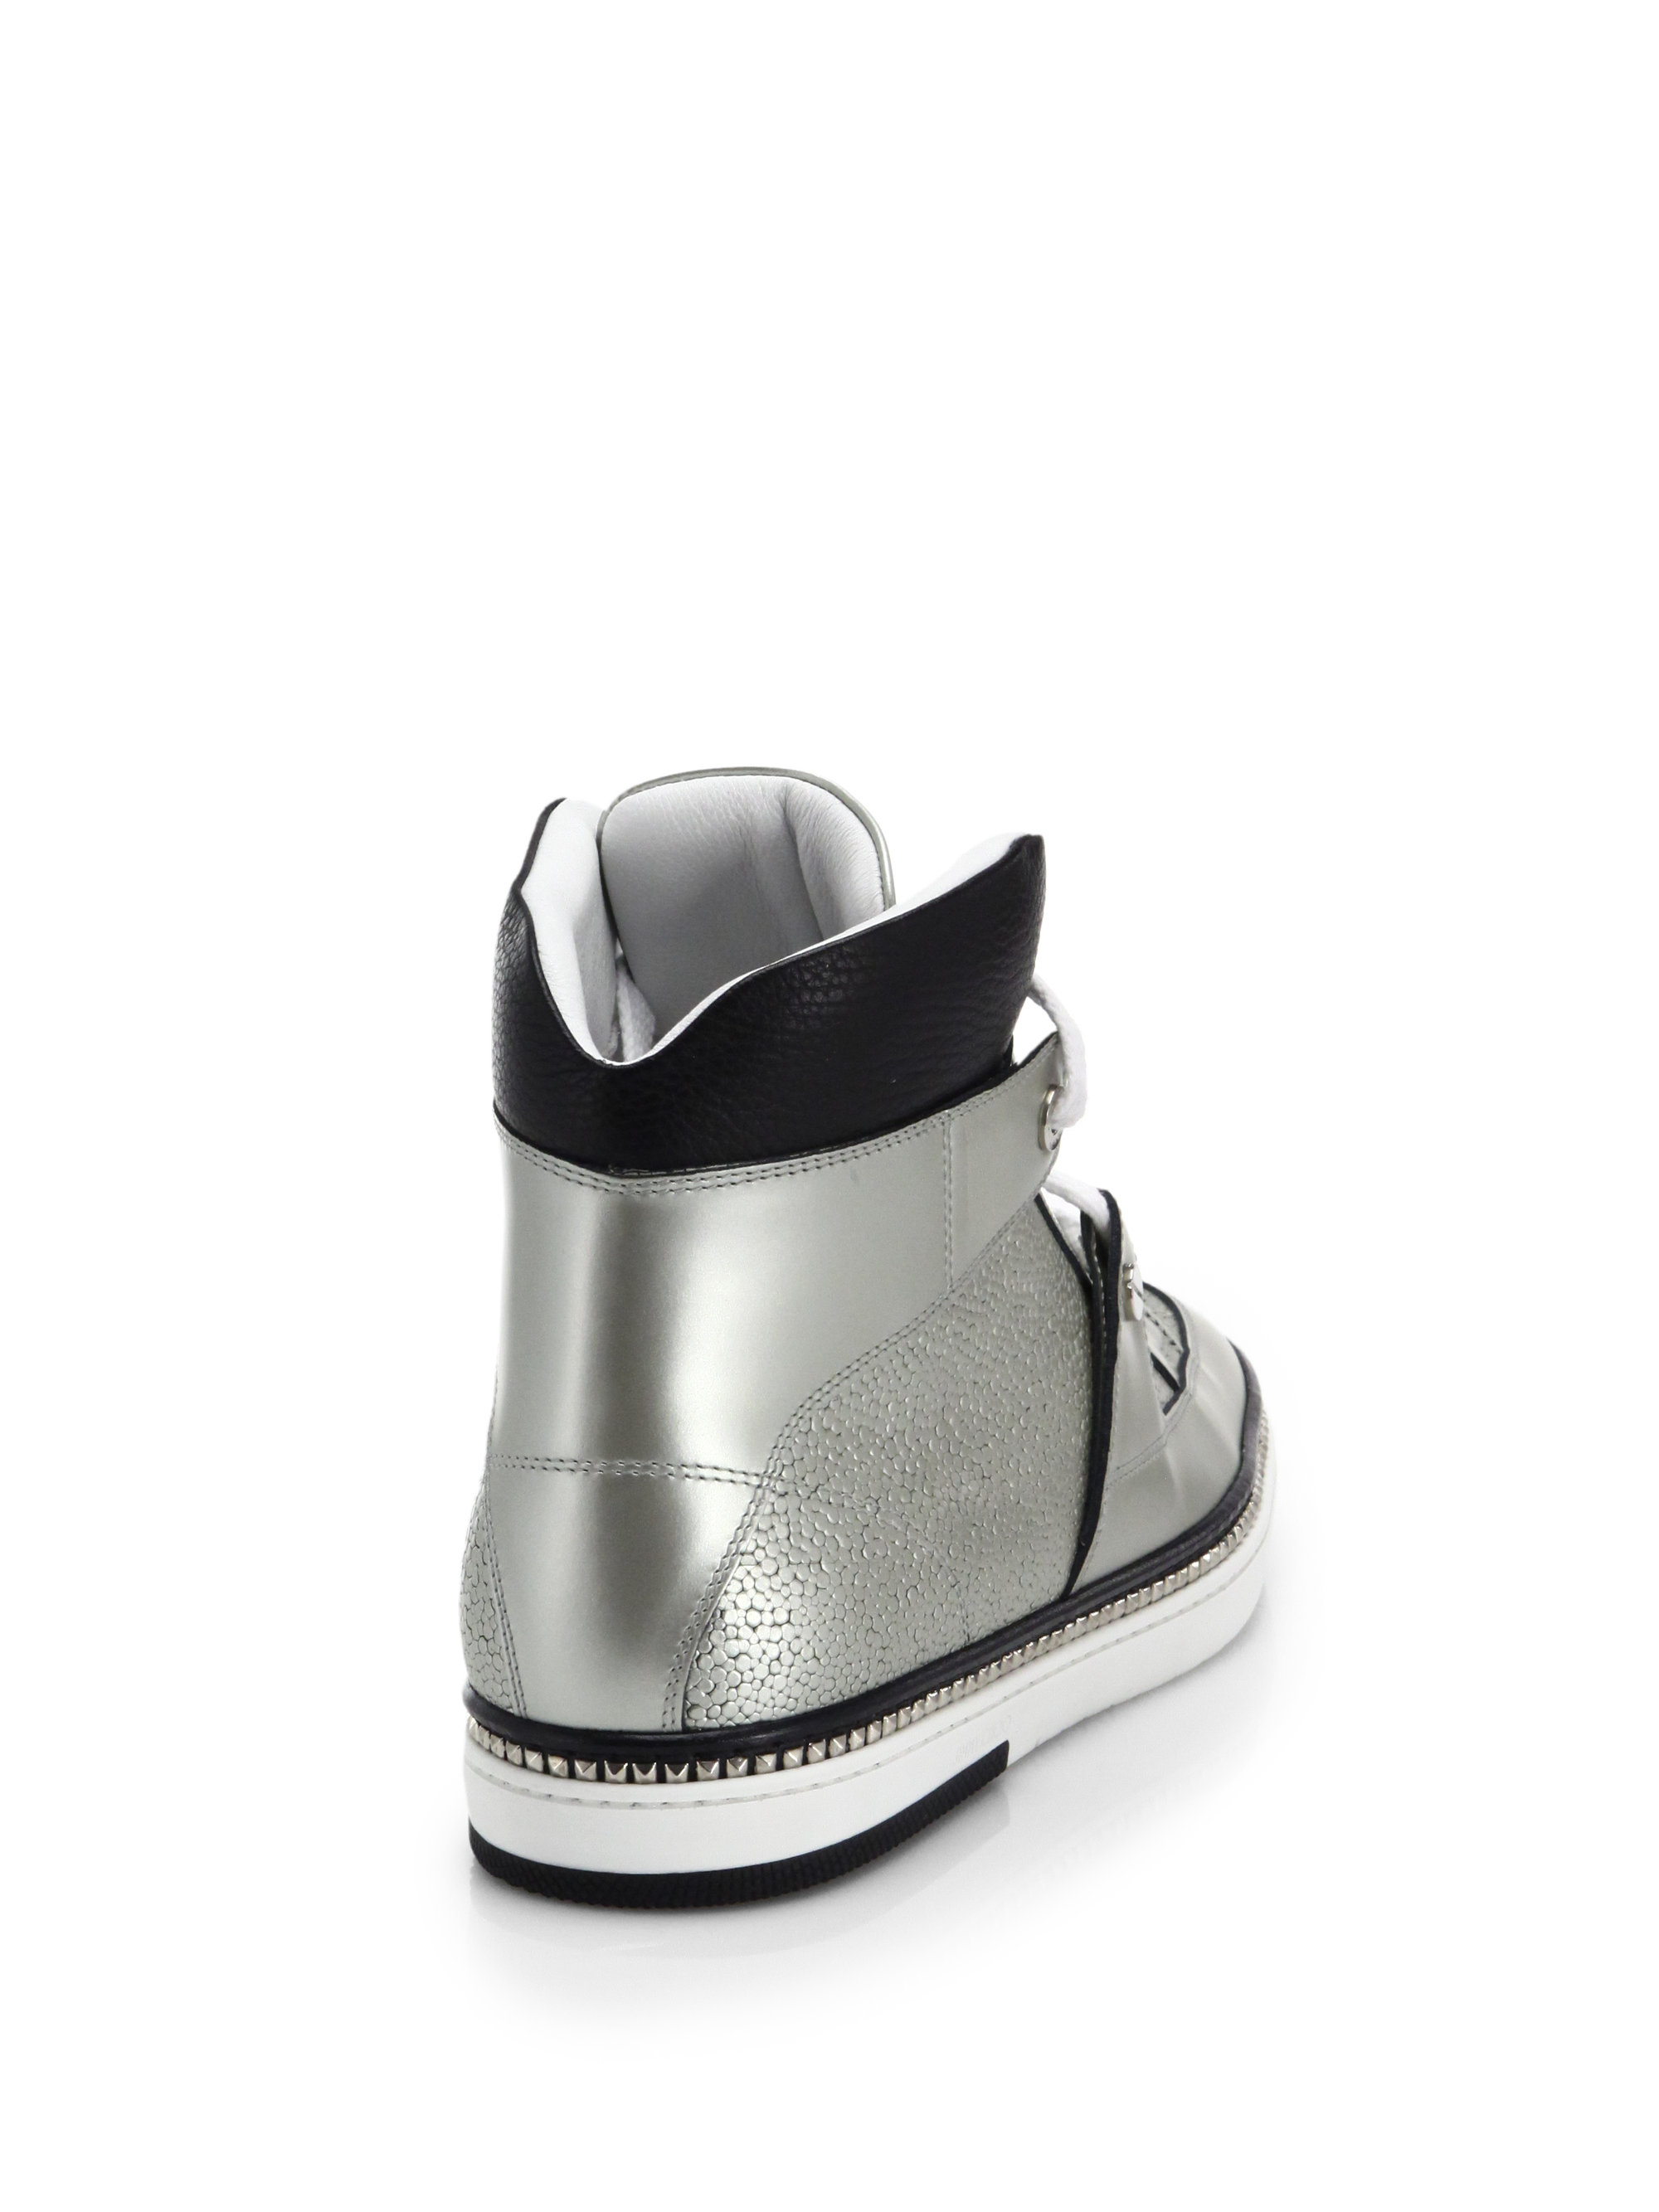 Jimmy Choo Barlowe Studded Leather High-Top Sneakers in Silver (Metallic) for Men - Lyst